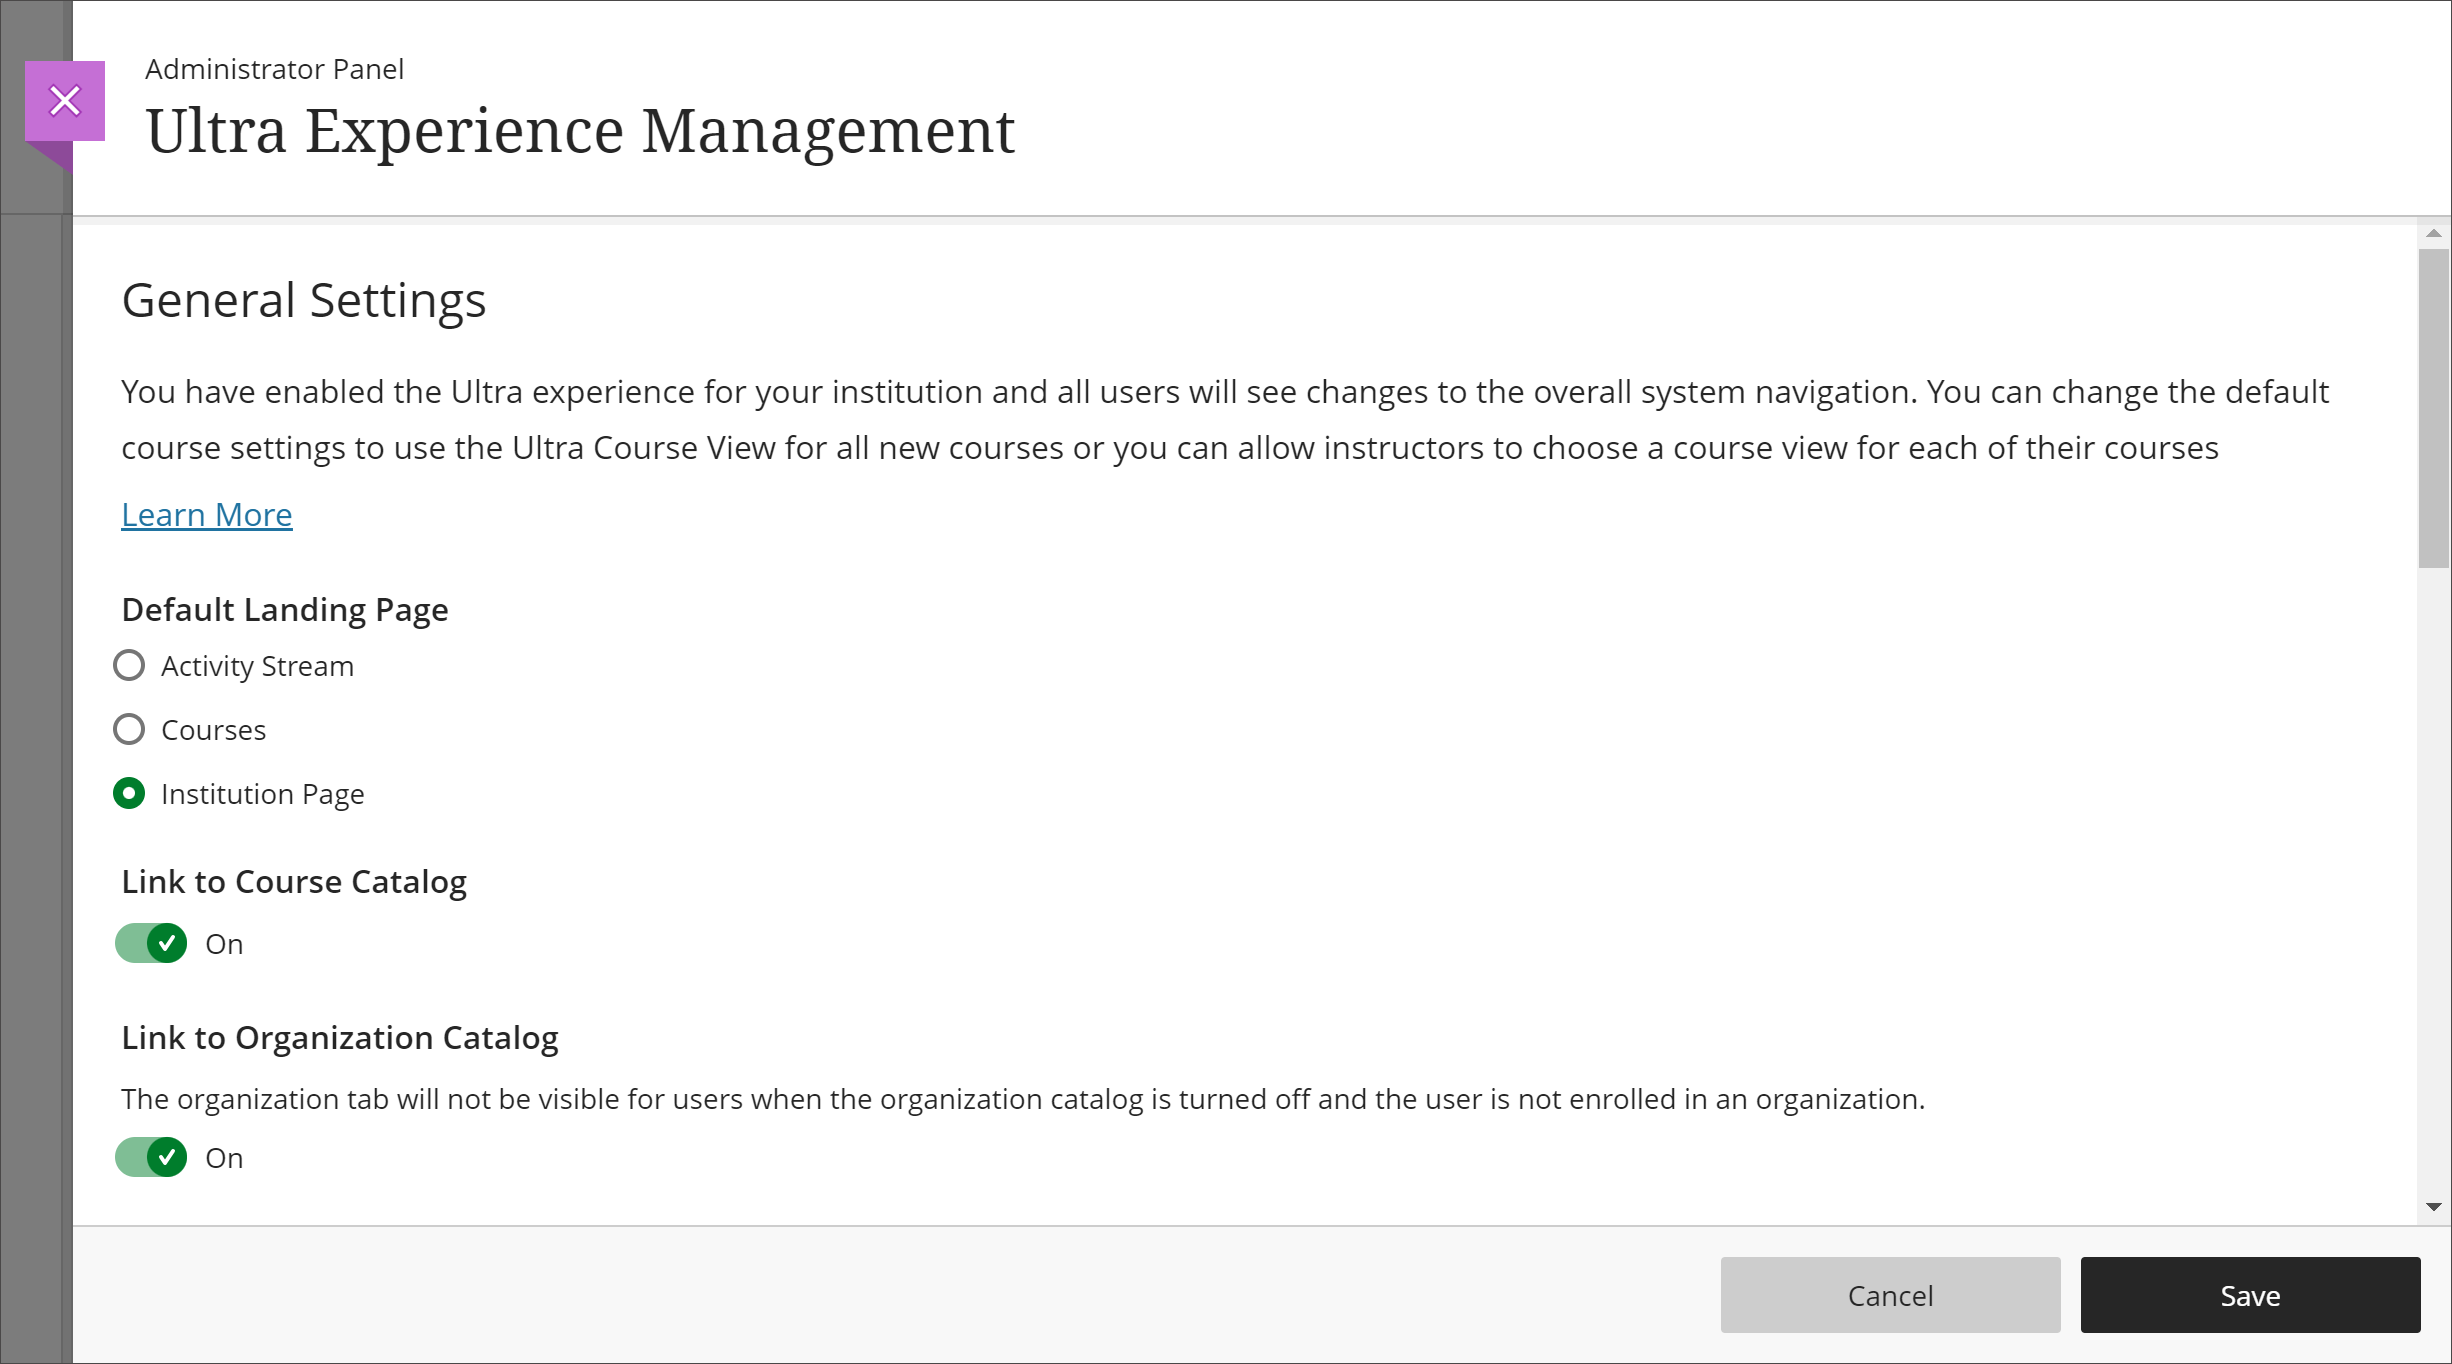 Link to Course Catalog and Link to Organization Catalogue options on Administrator Panel